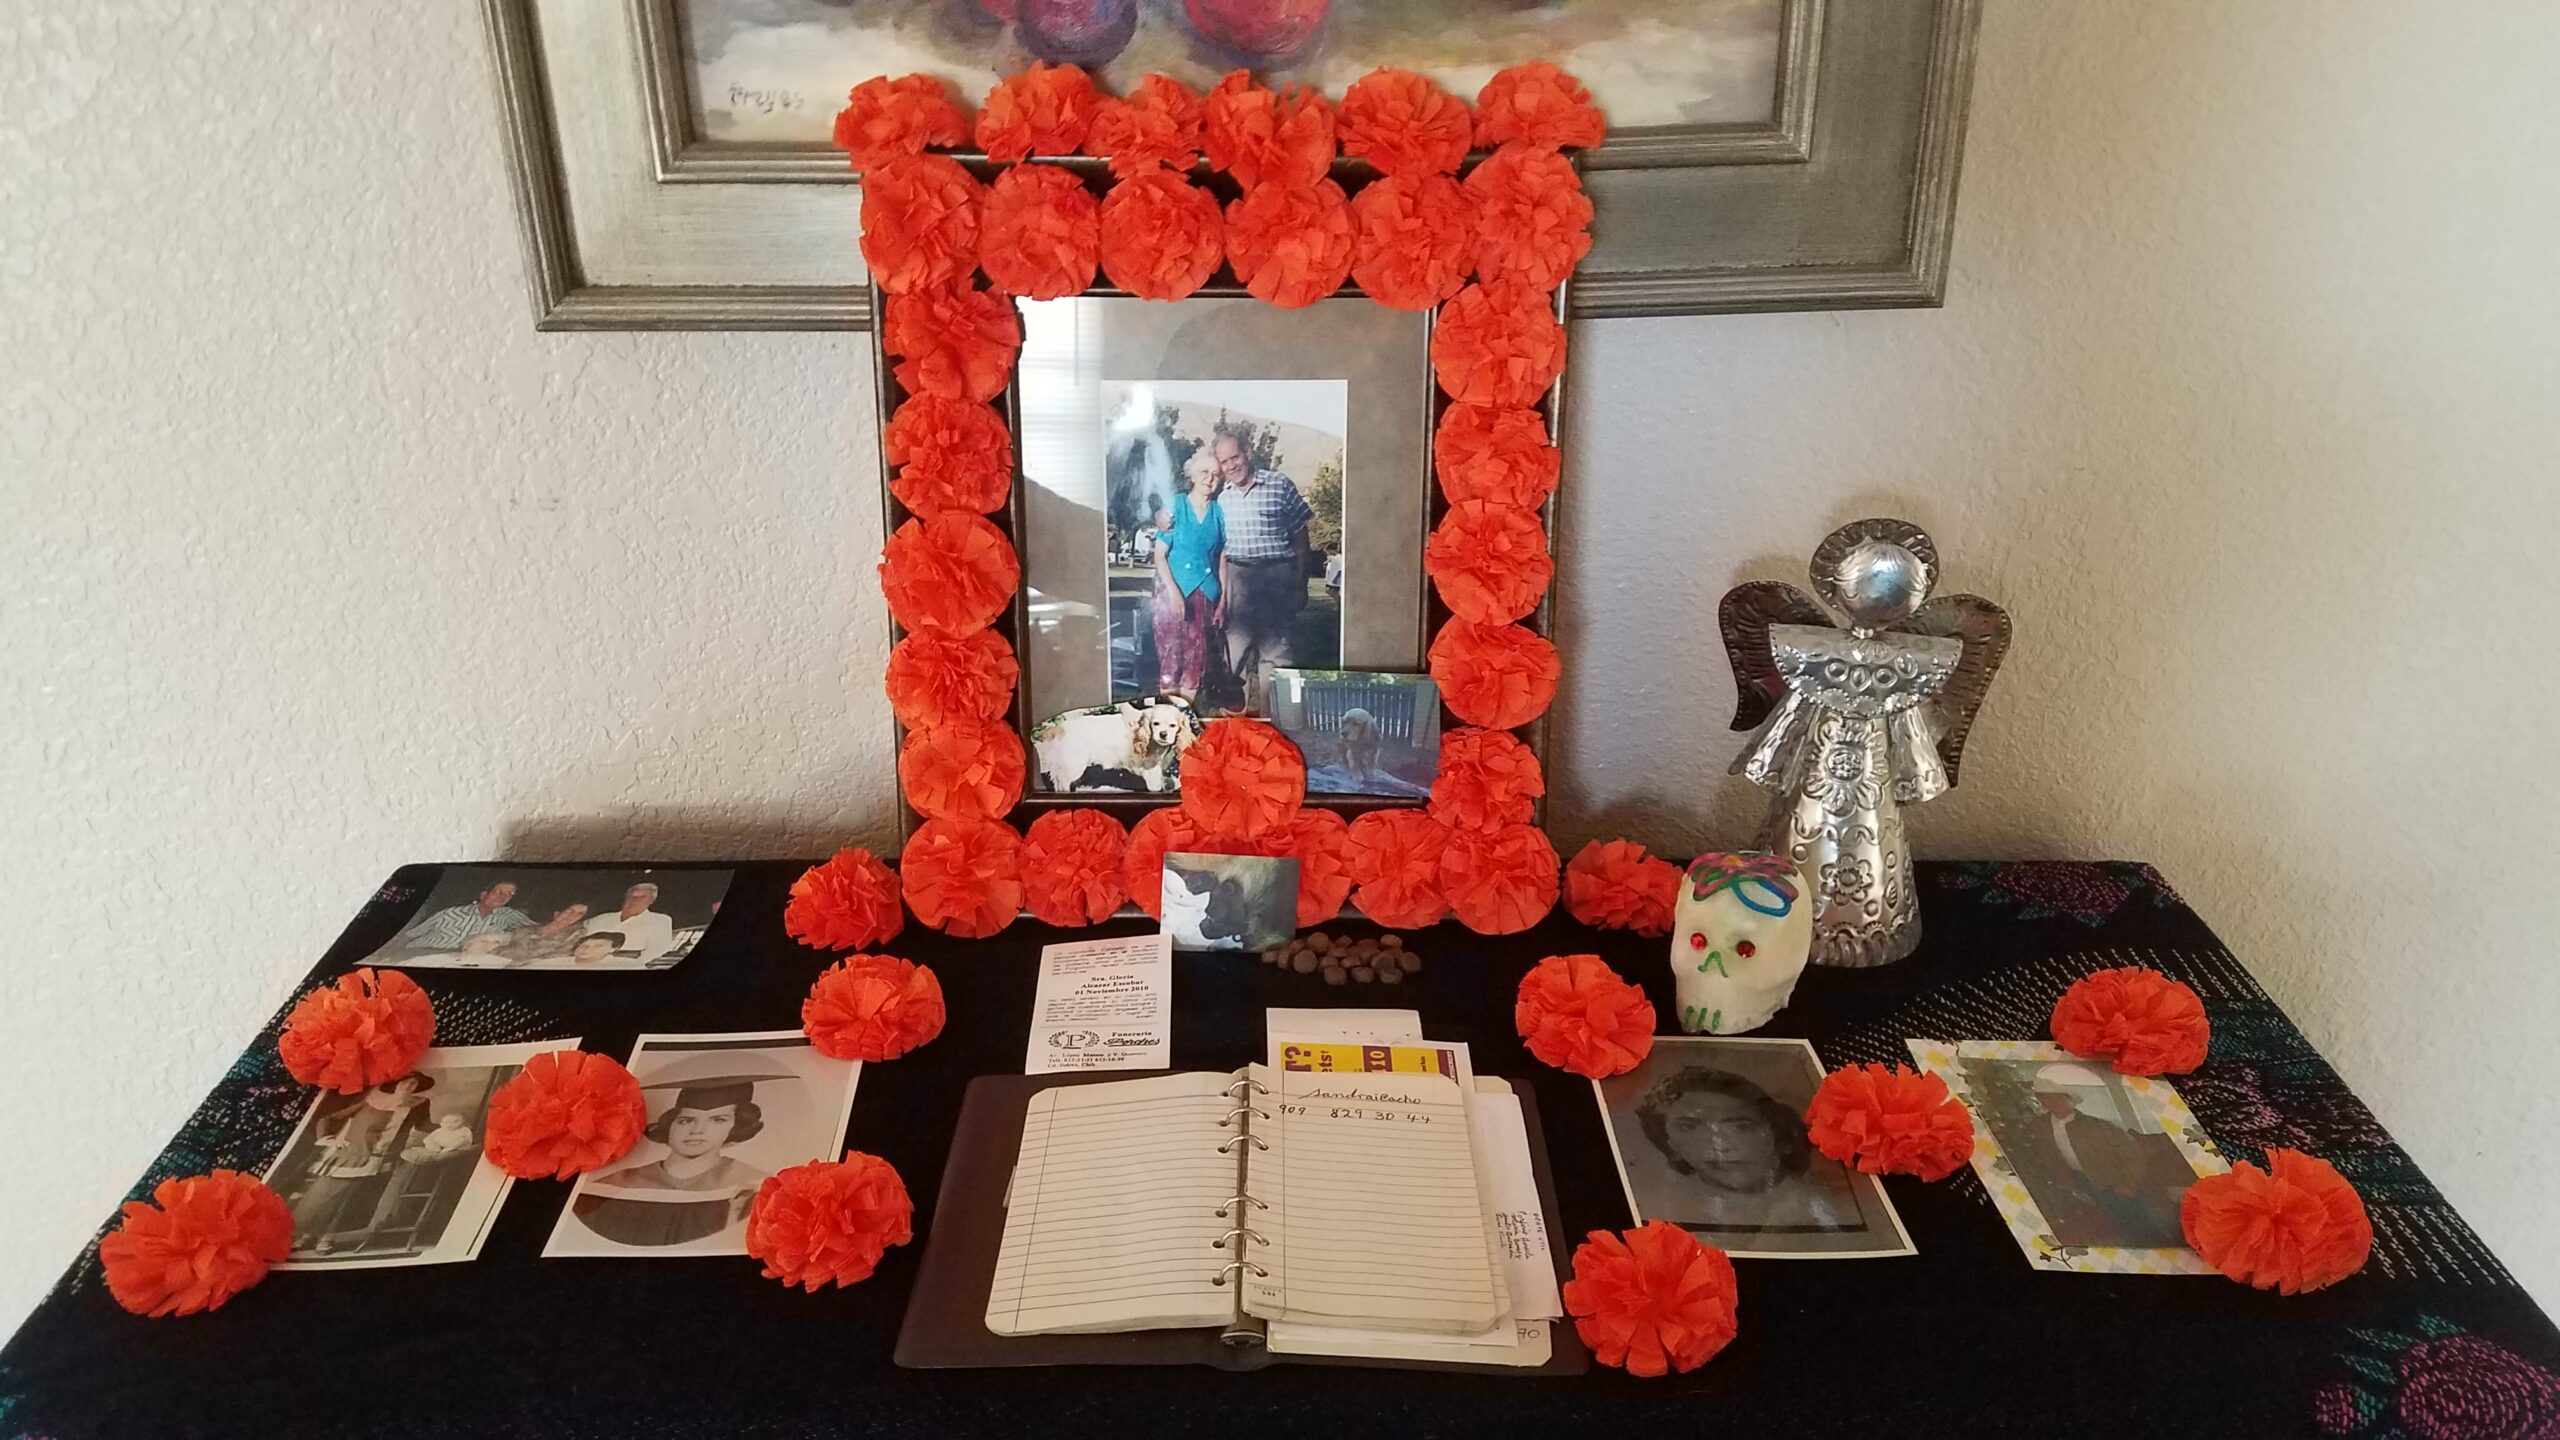 An altar featuring red flowers, photographs of loved ones and small keepsakes including a sugar skull and an angel figurine.